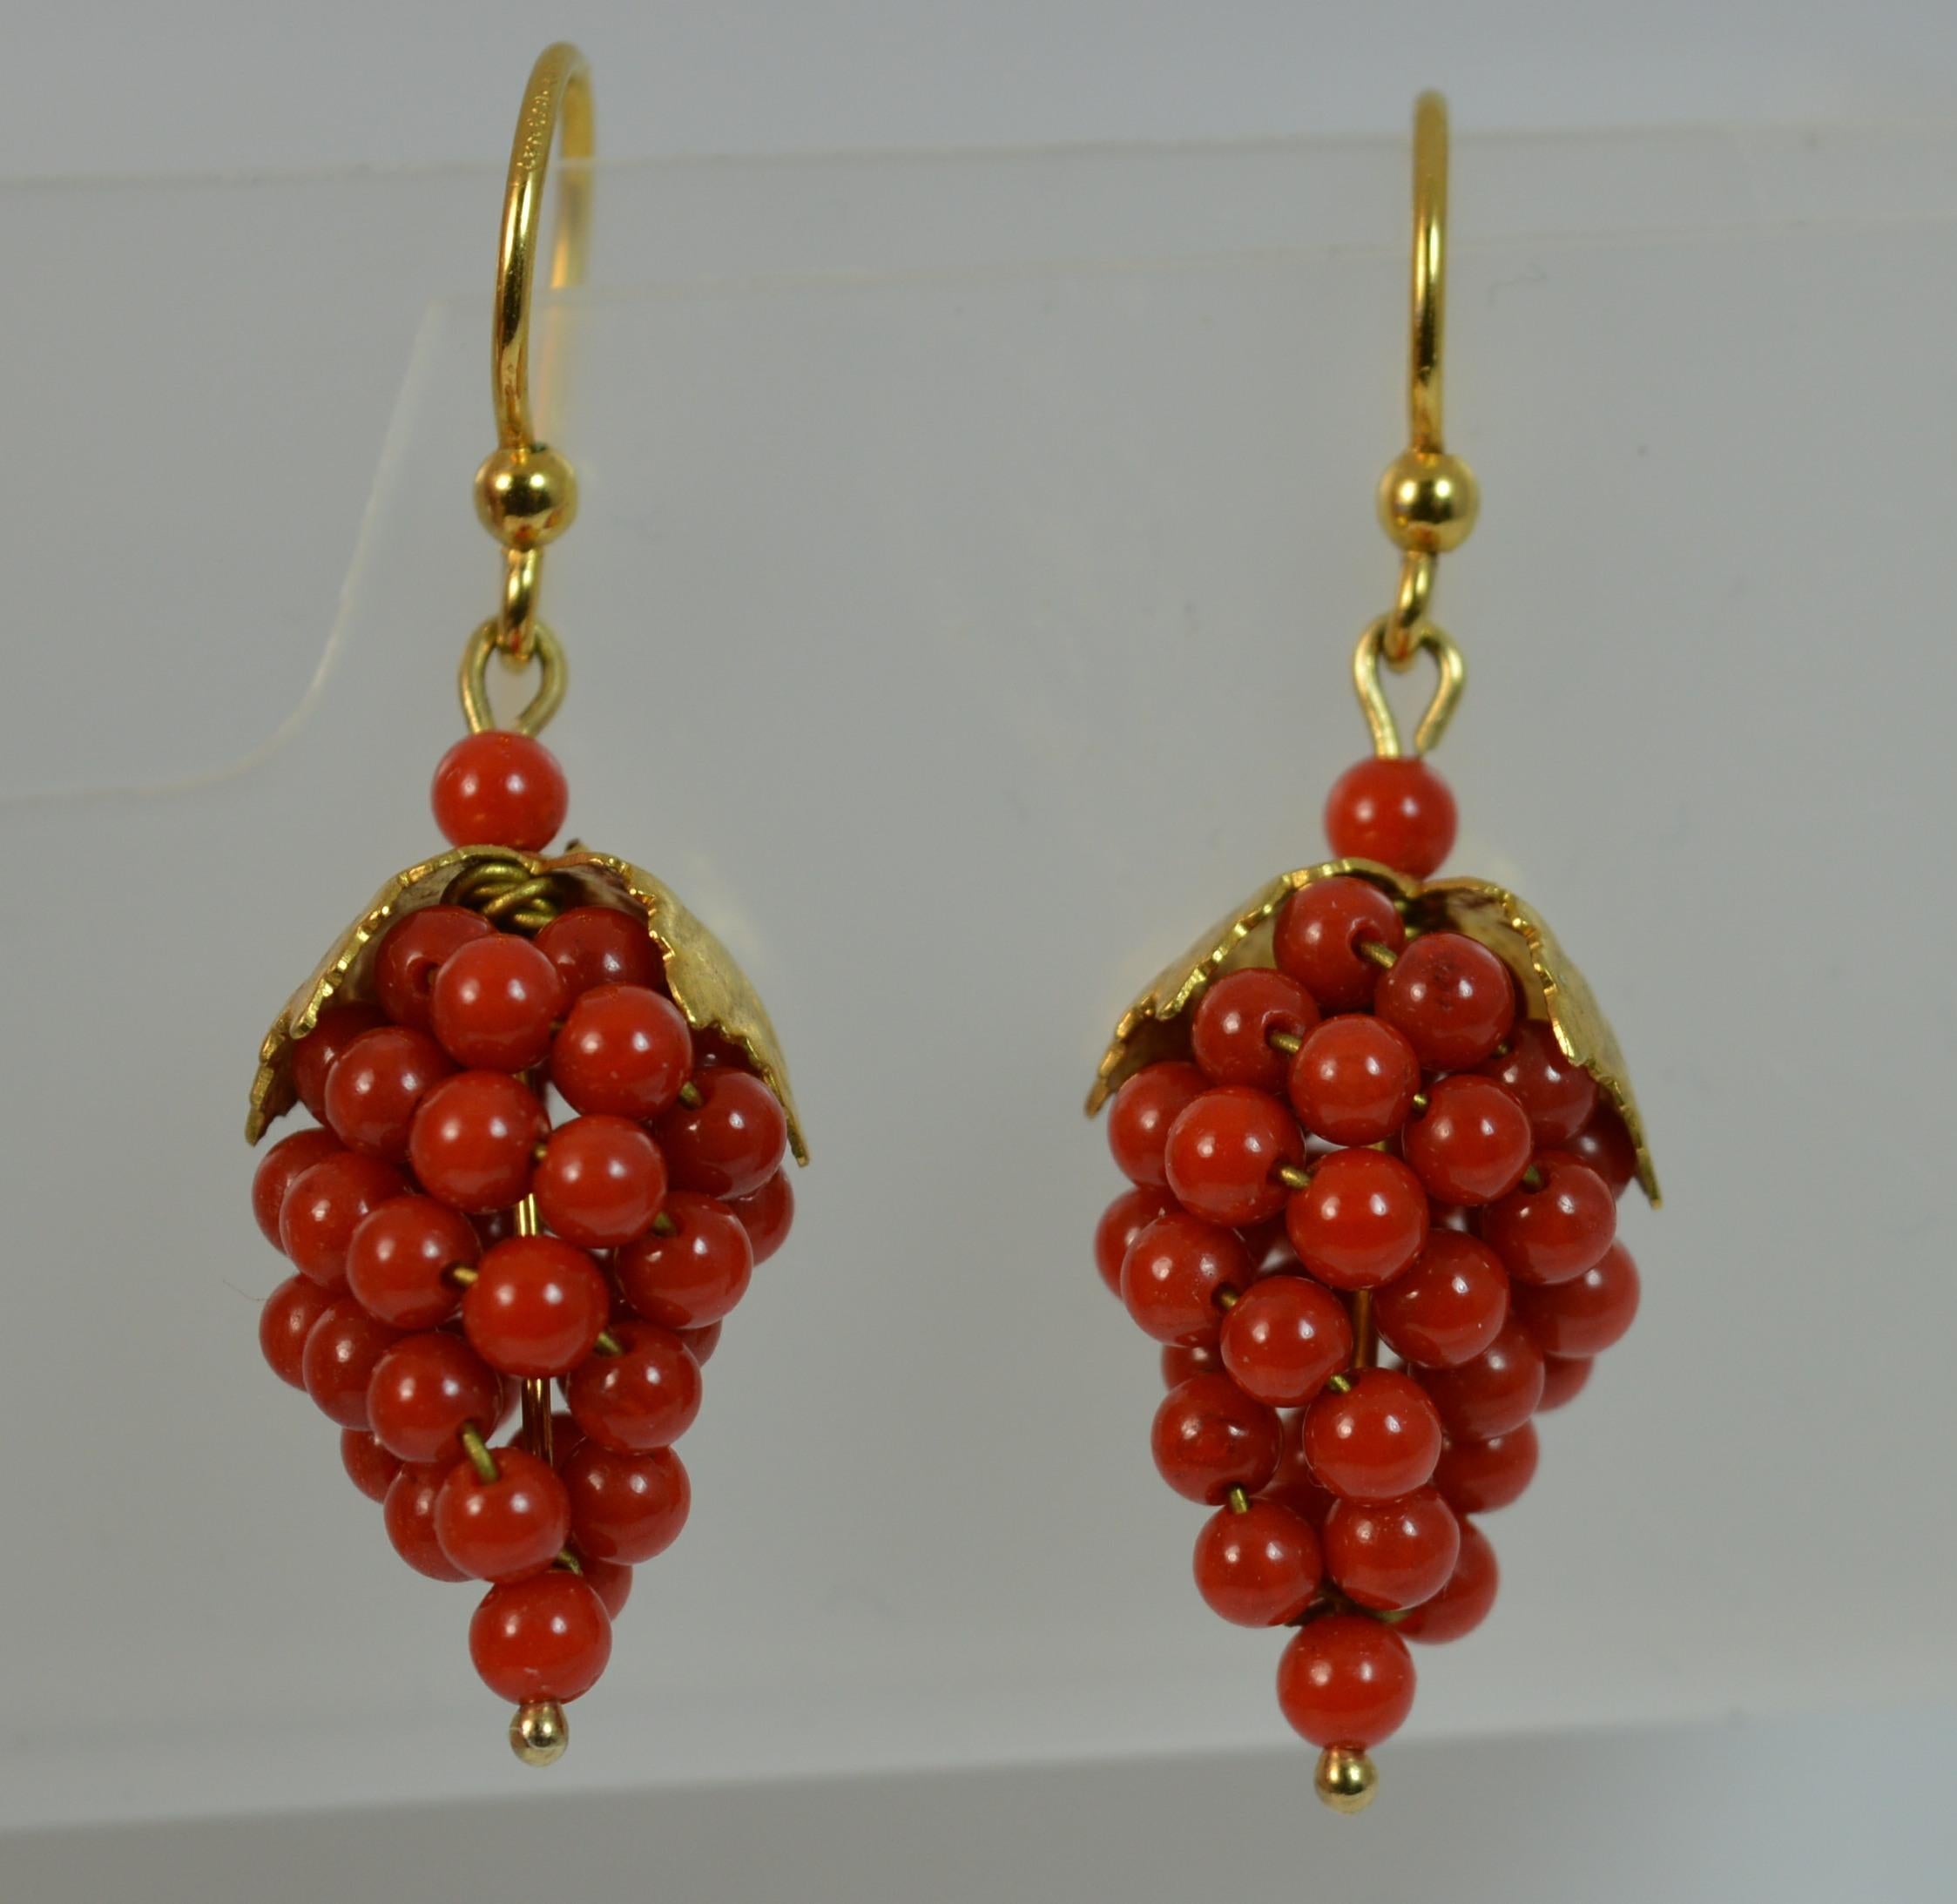 A stunning pair of drop dangle earrings.

True Victorian era example, c1880.

Modelled in 15 carat yellow gold.

Designed with two leaves to the top and coral cabochon stones shaped as berries below.

CONDITION ; Very good. Crisp design. In clean